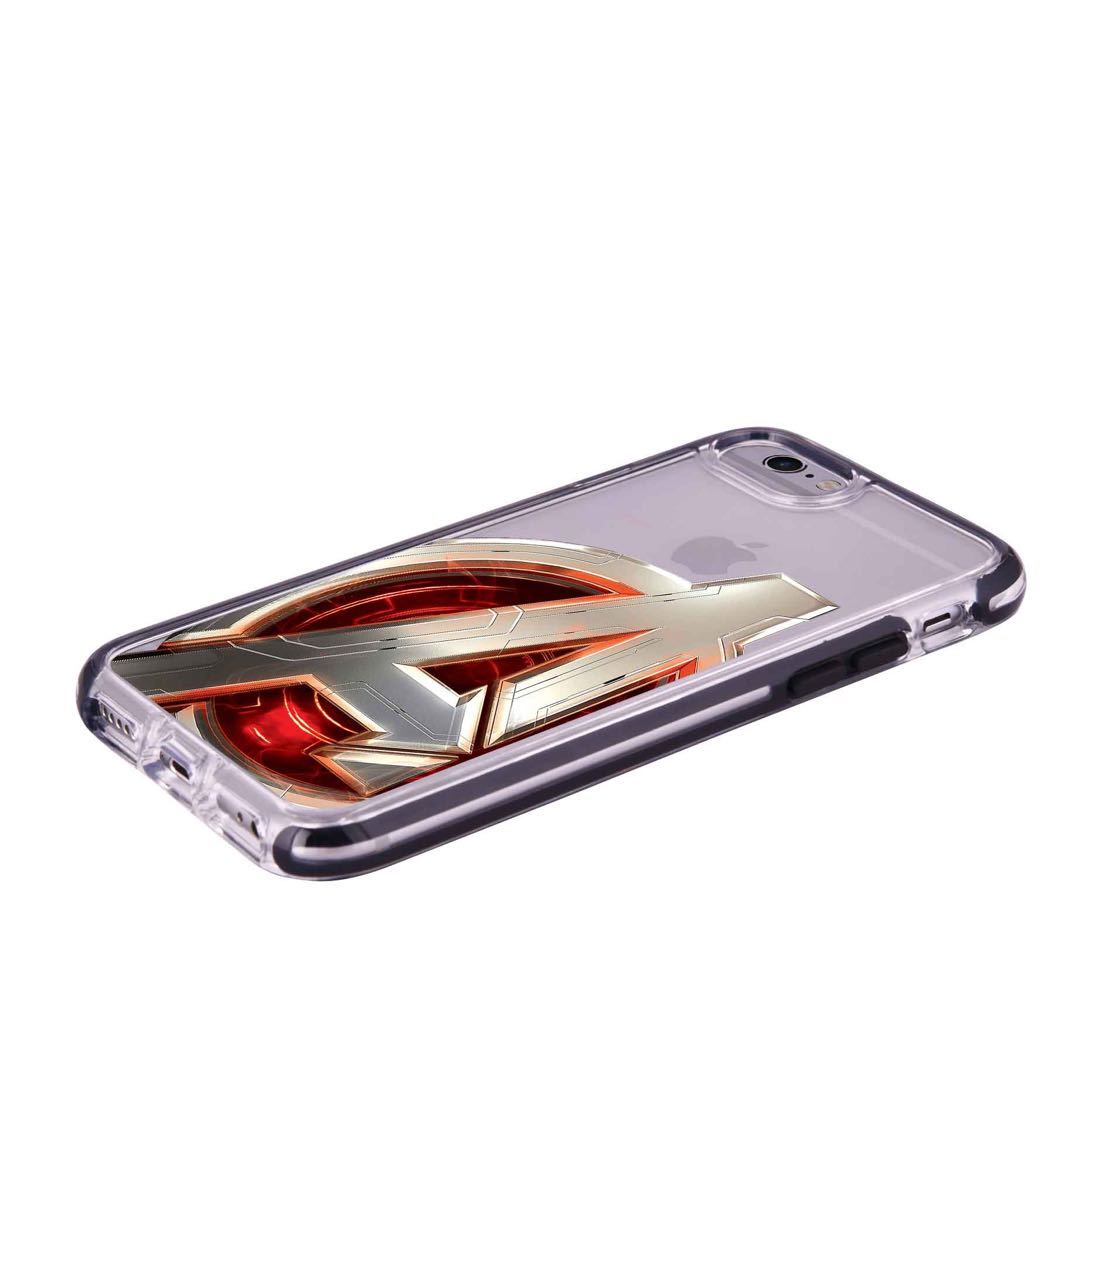 Avengers Version 2 - Extreme Phone Case for iPhone 6 Plus